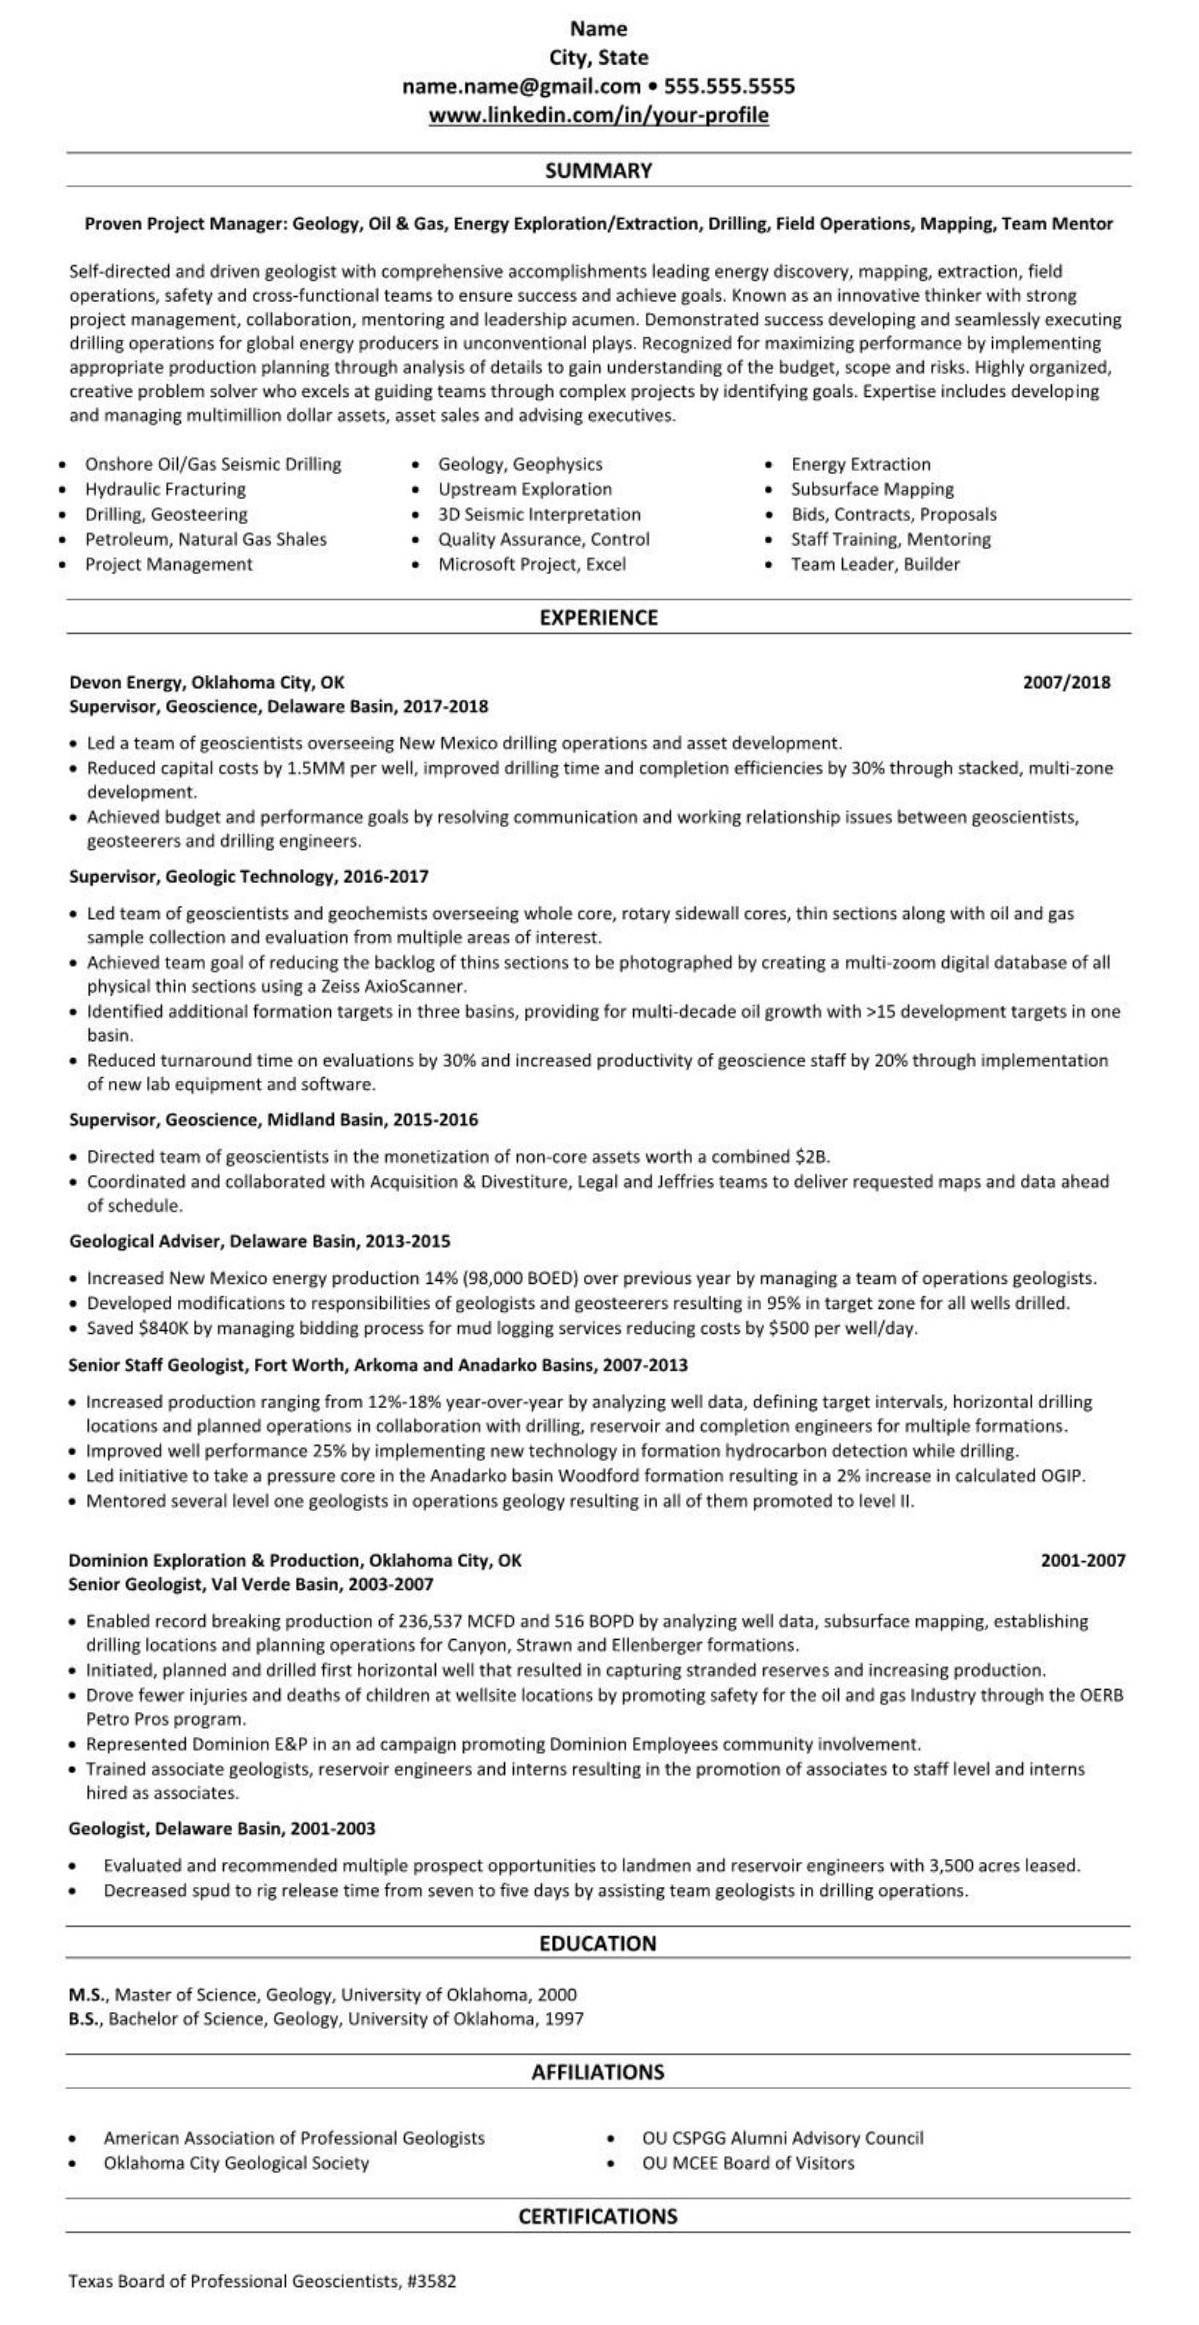 Resume Templates for Oil and Gas Industry Resume & Linkedin Profile Example: Energy Power Oil, Gas, Wind, solar